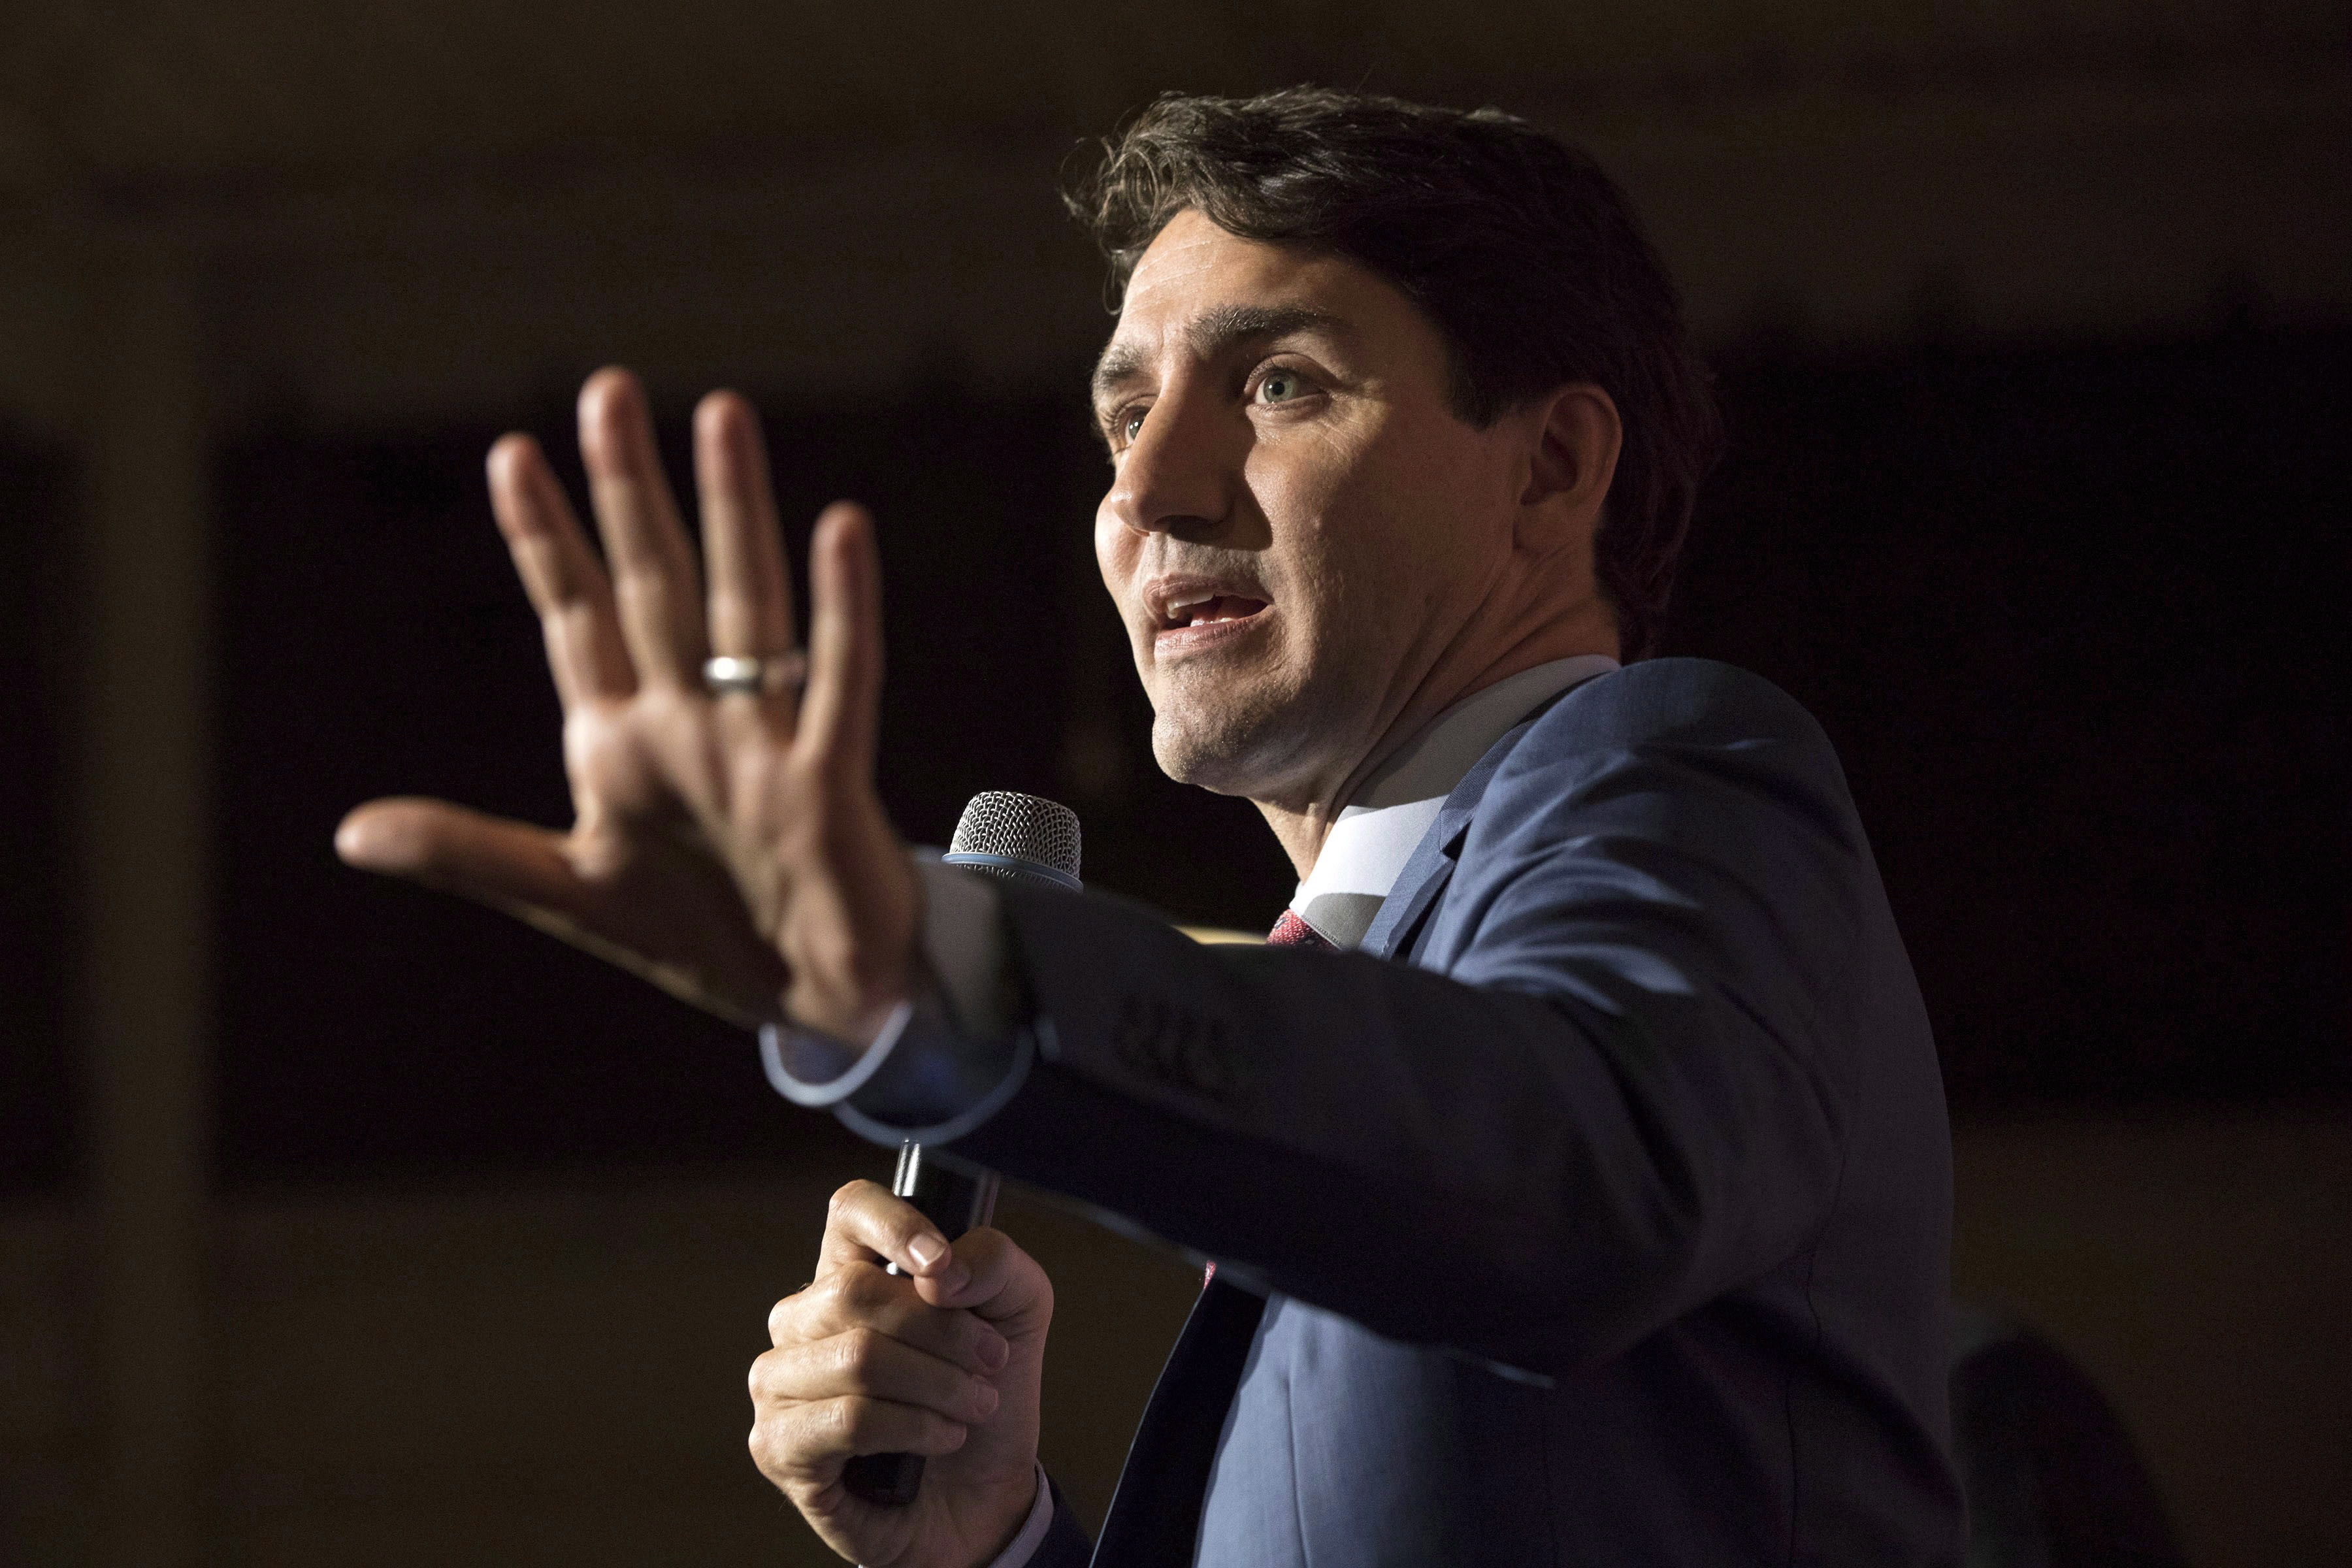 2019 federal election campaign likely to be nastiest ever, Trudeau says